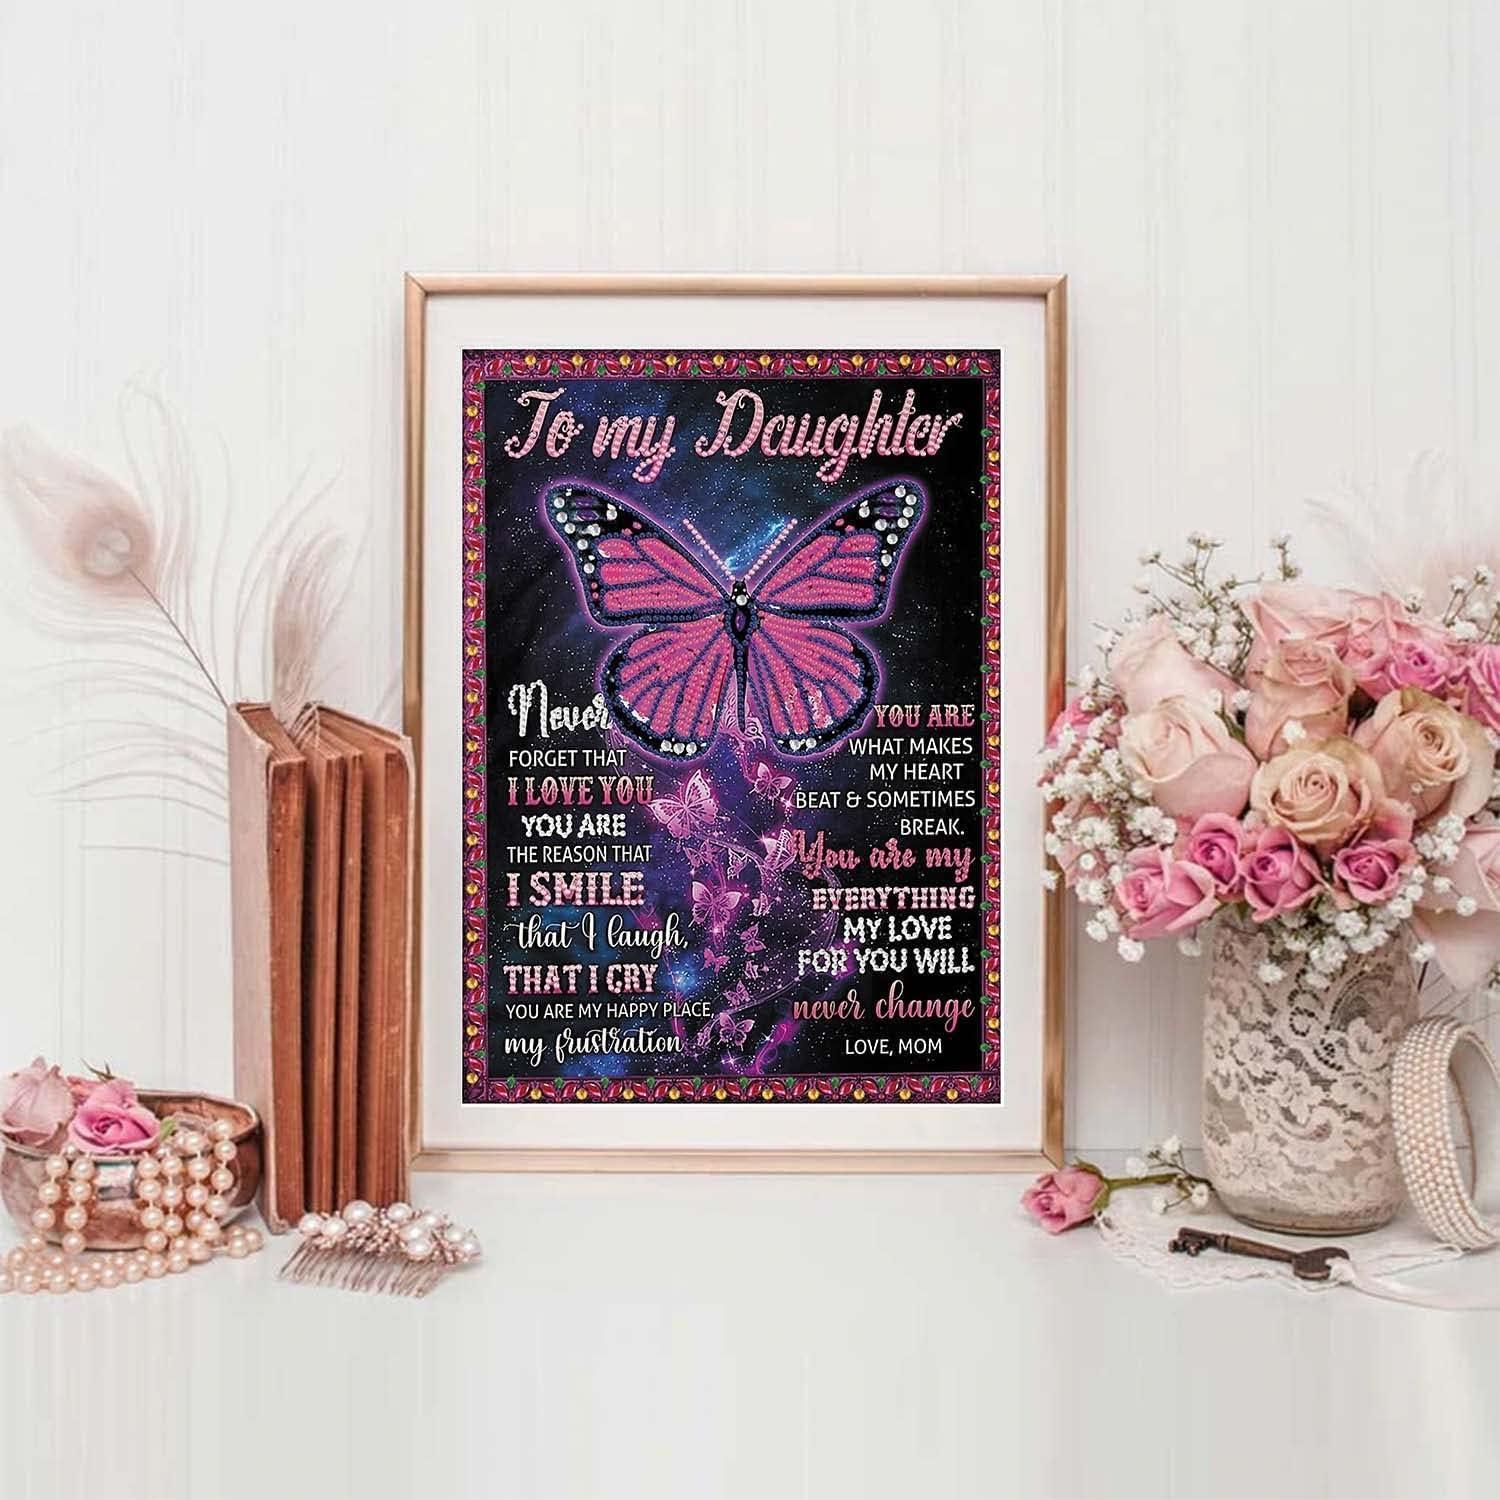 Butterfly Diamond Painting Kits for Adults Beginner ,5D DIY Full Drill Diamond  Art for Home Decor Gifts 12x16inch 